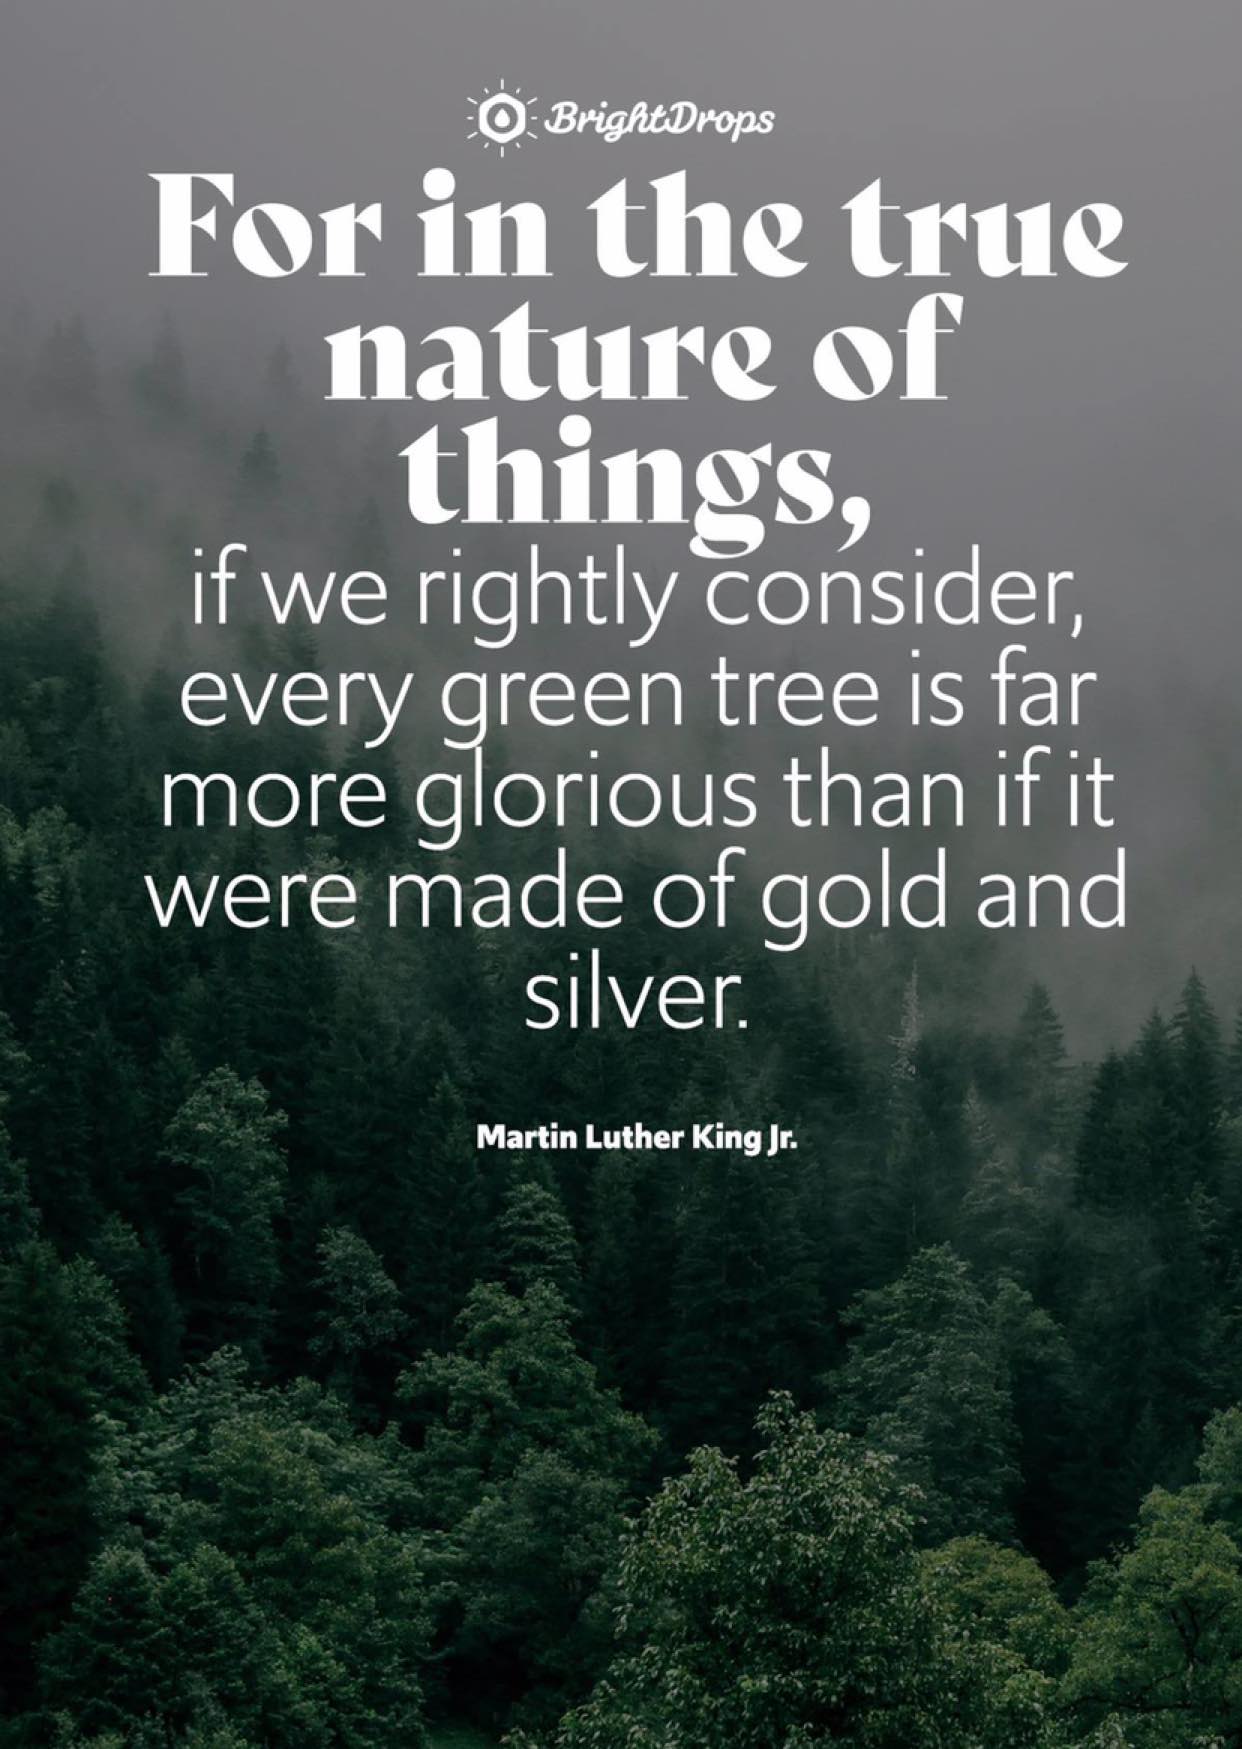 For in the true nature of things, if we rightly consider, every green tree is far more glorious than